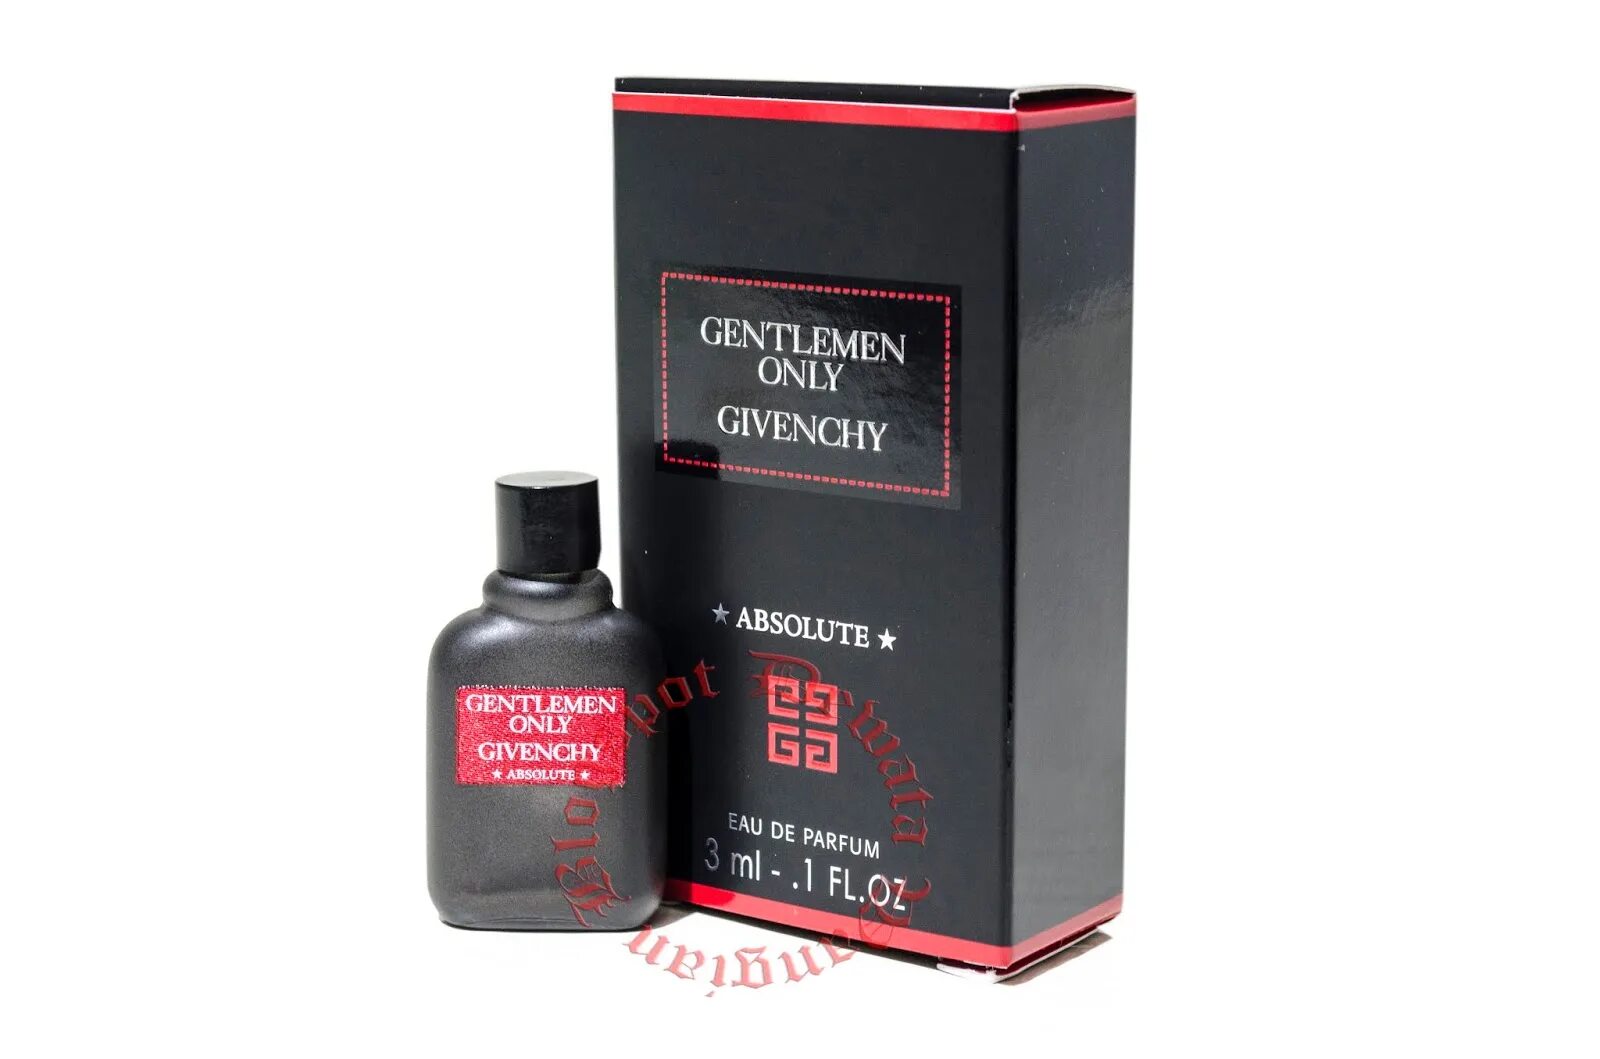 Givenchy Gentlemen only absolute. Givenchy Gentlemen only absolute тестер. Gentleman миниатюра. Givenchy упаковка туалетной воды Gentleman only.